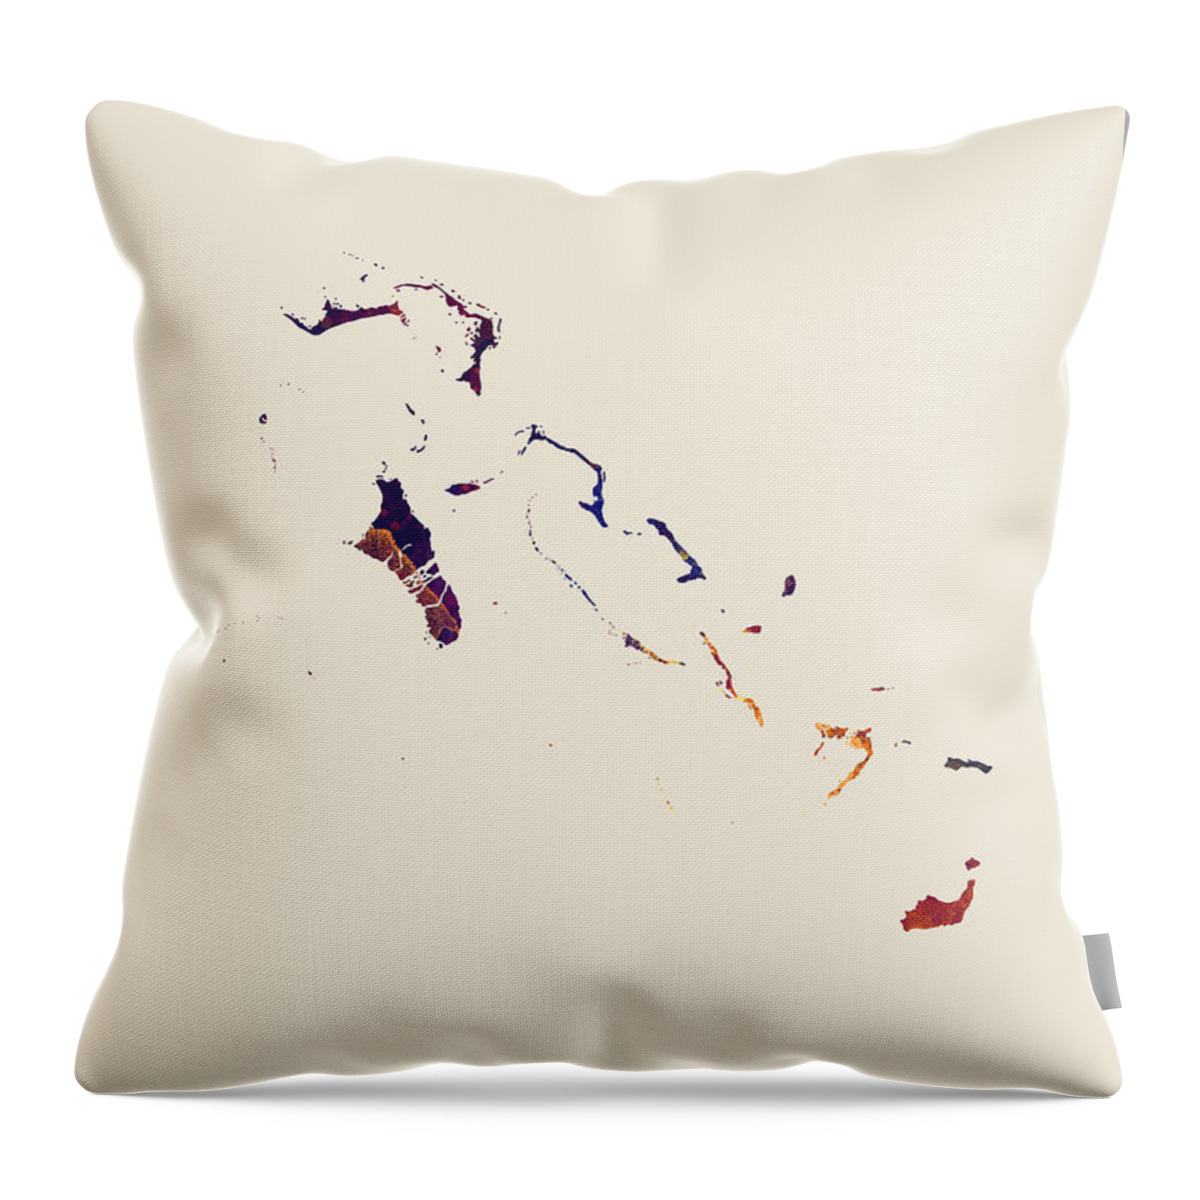 The Bahamas Throw Pillow featuring the digital art The Bahamas Watercolor Map by Michael Tompsett